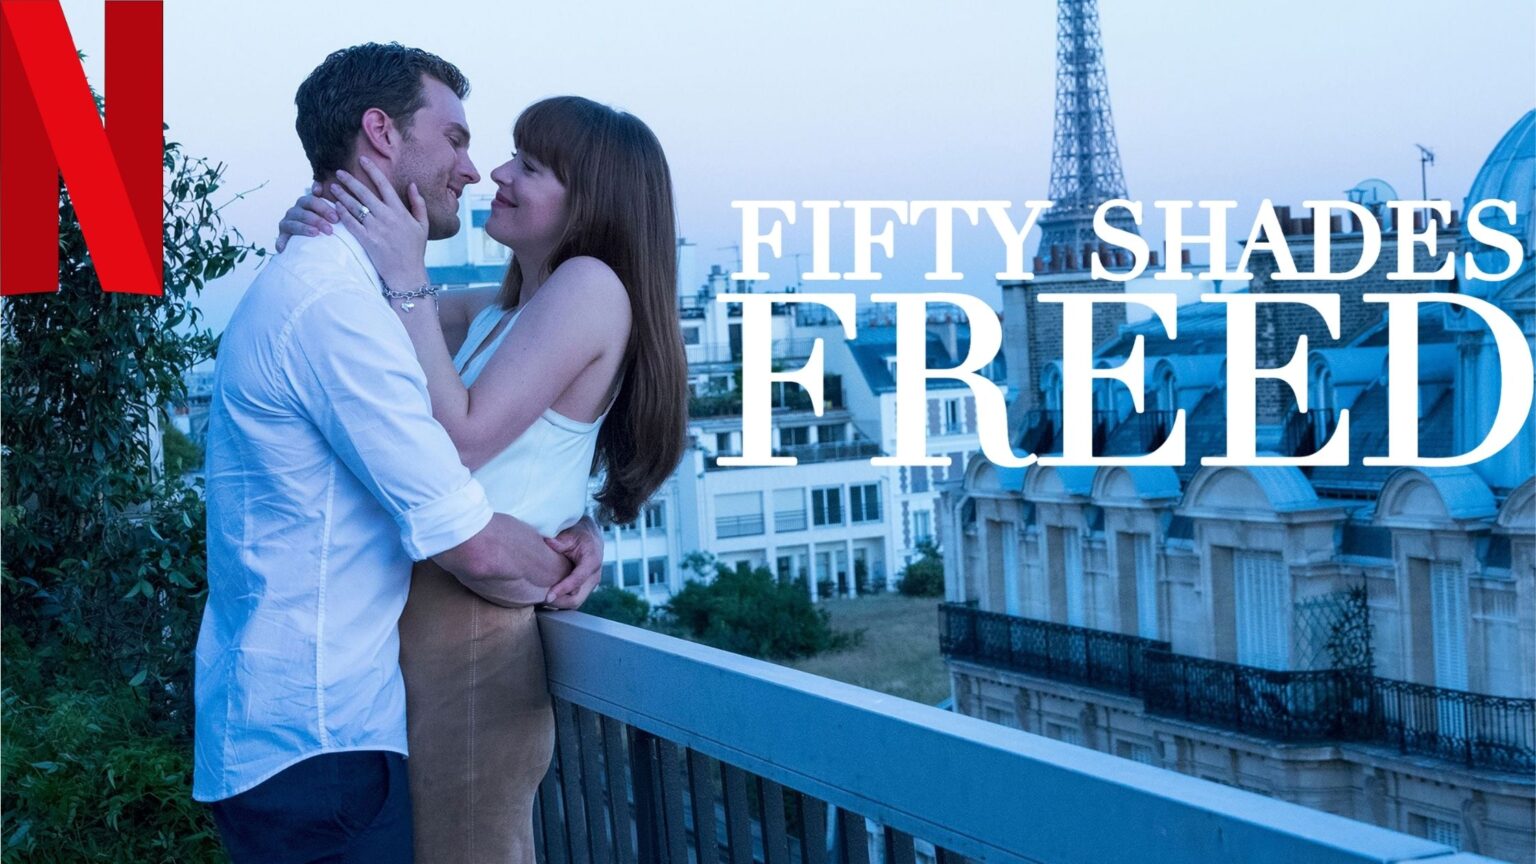 Fifty Shades Freed 2018 On Netflix How To Watch It From Anywhere In The World Vpn Helpers 